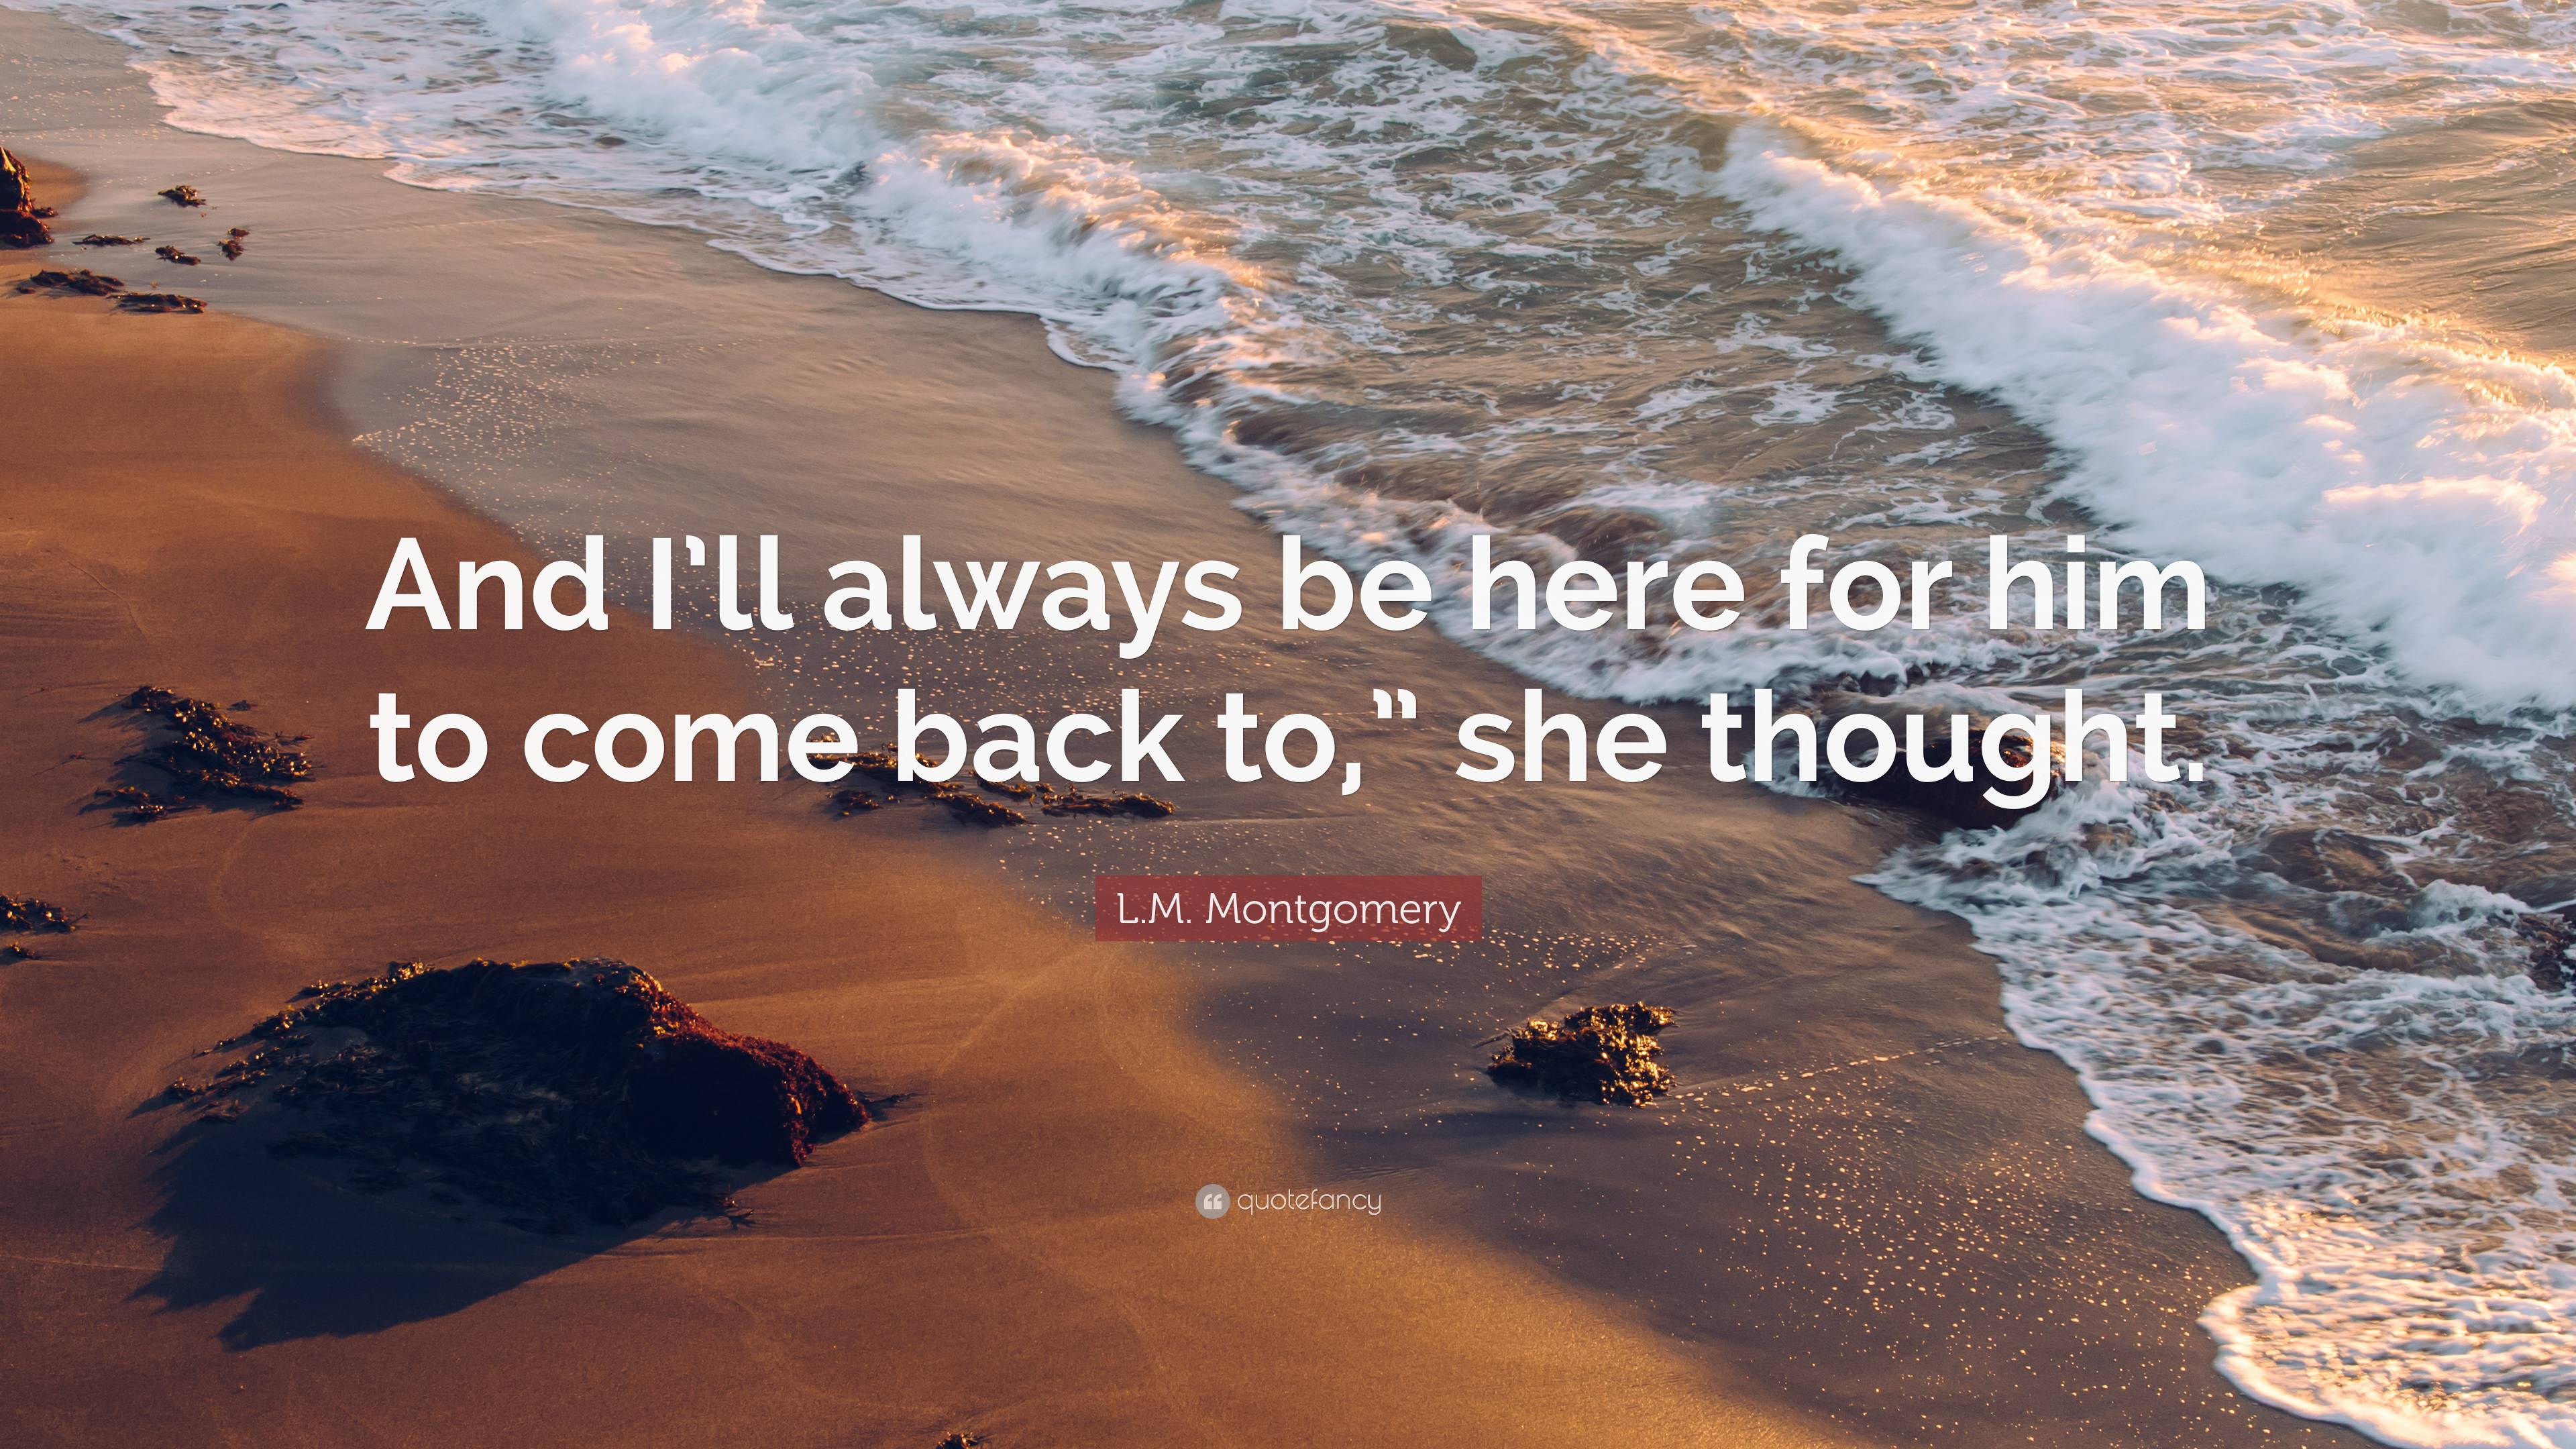 L.M. Montgomery Quote: “And I’ll always be here for him to come back to ...